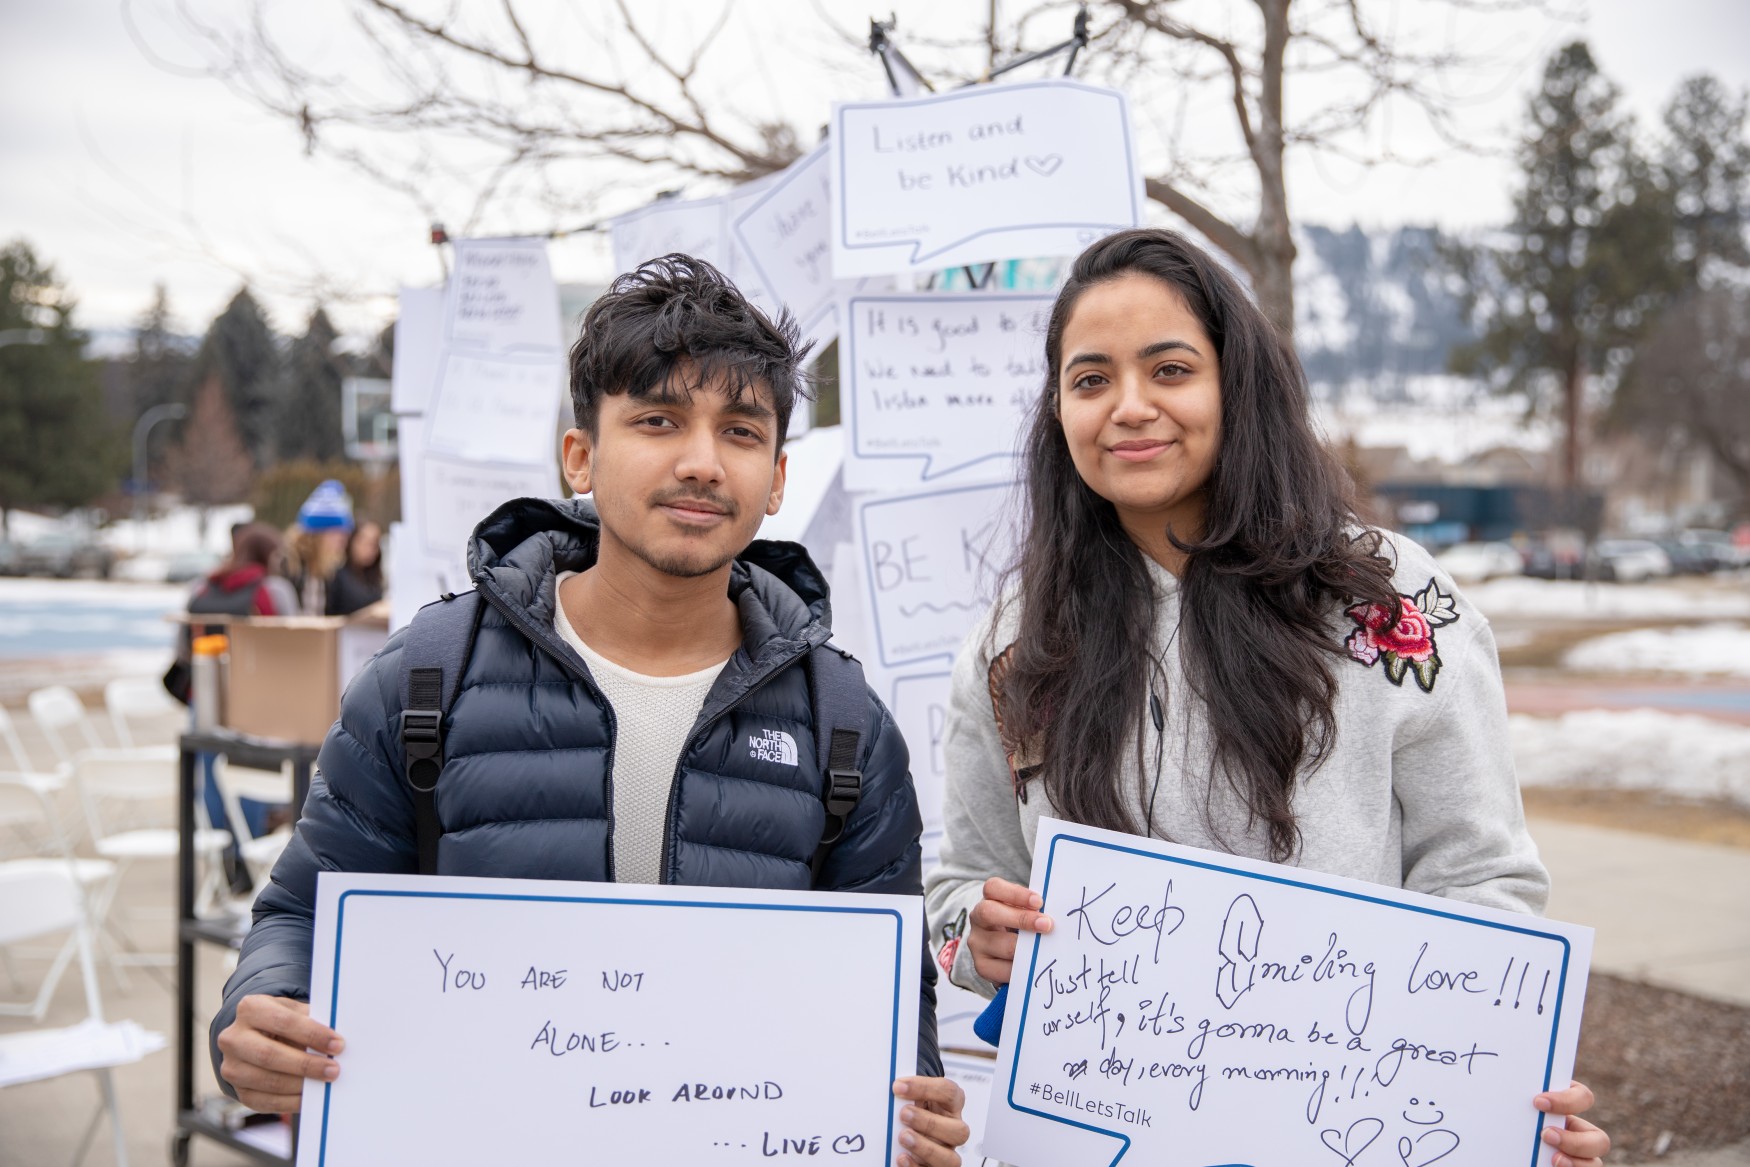 students pose with mental health awarenss signs